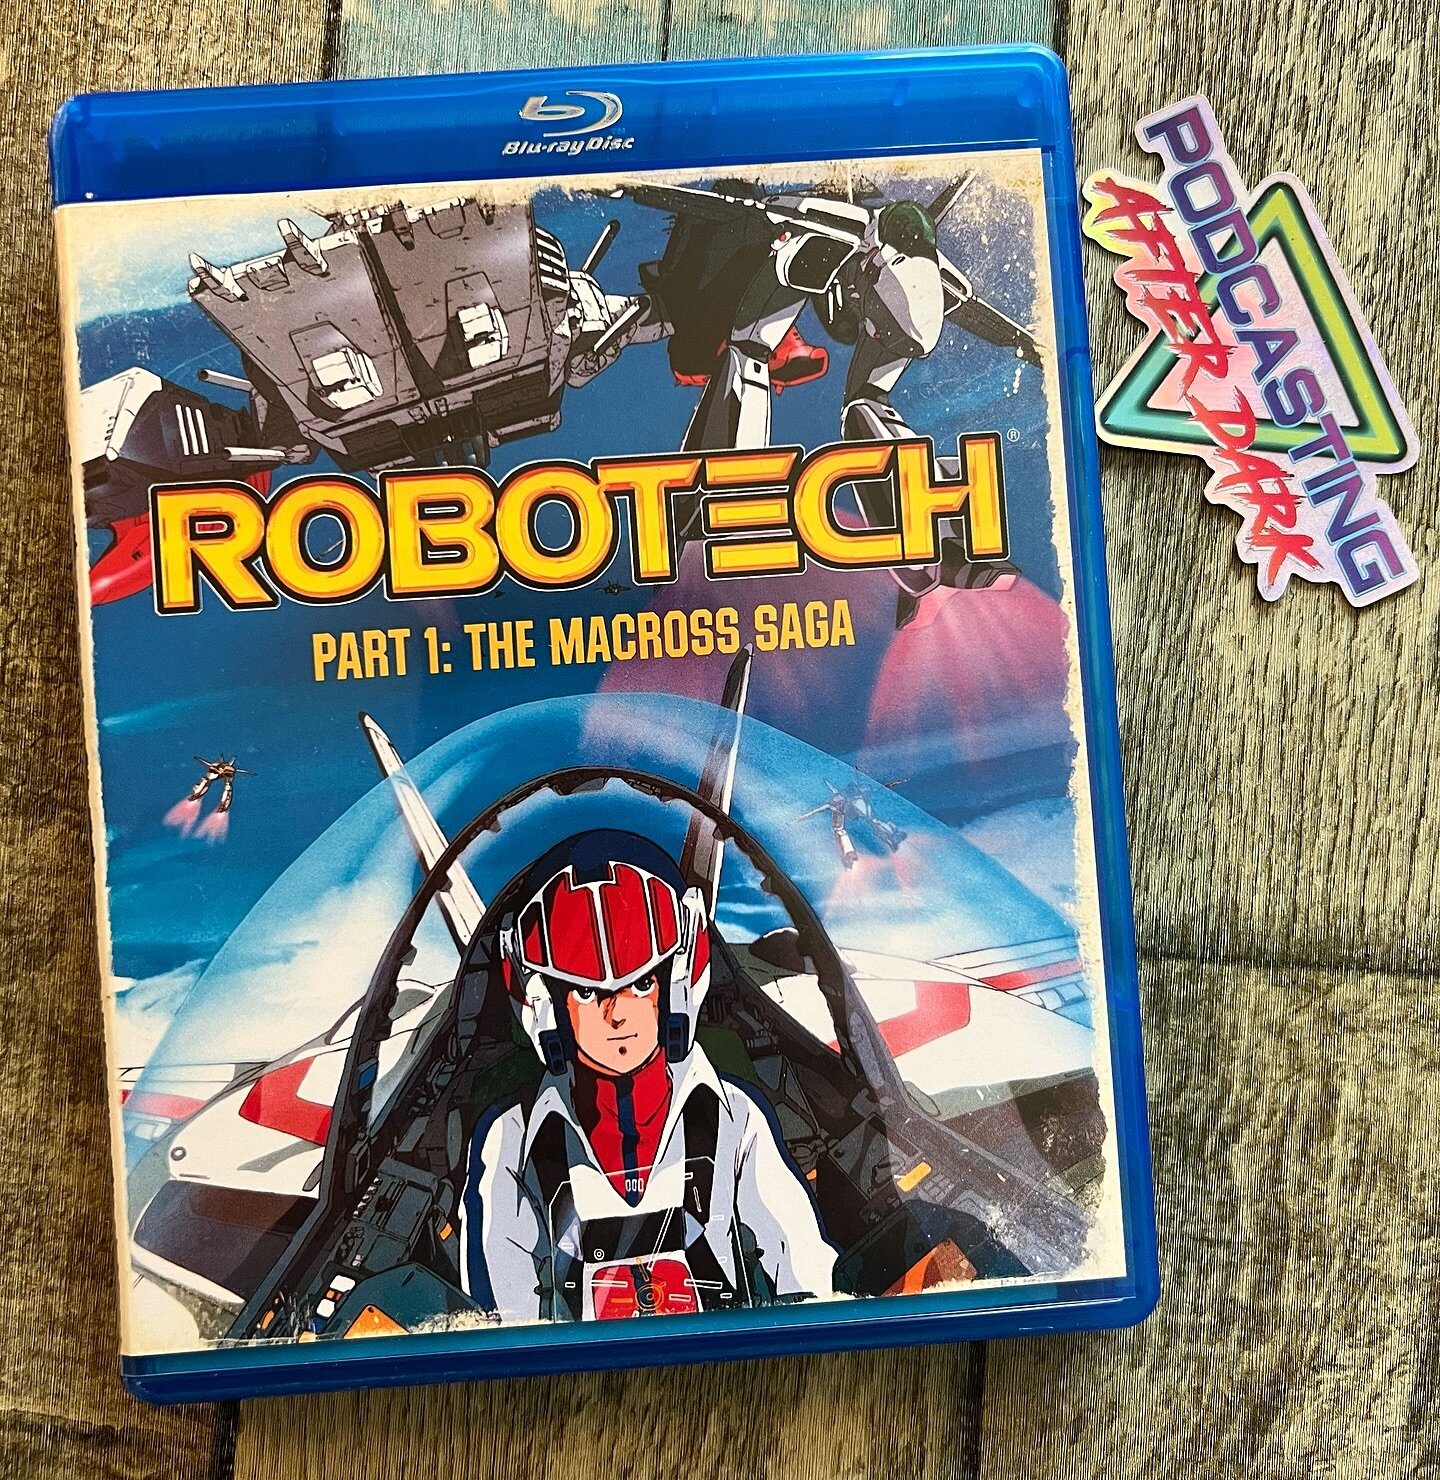 We&rsquo;re discussing ROBOTECH: THE MACROSS SAGA on TV Obscura tonight! Everything from the Harmony Gold cartoons to the Matchbox toys, and the rest of the franchise as well (courtesy of Diallo&rsquo;s insane level of knowledge)! This episode will b